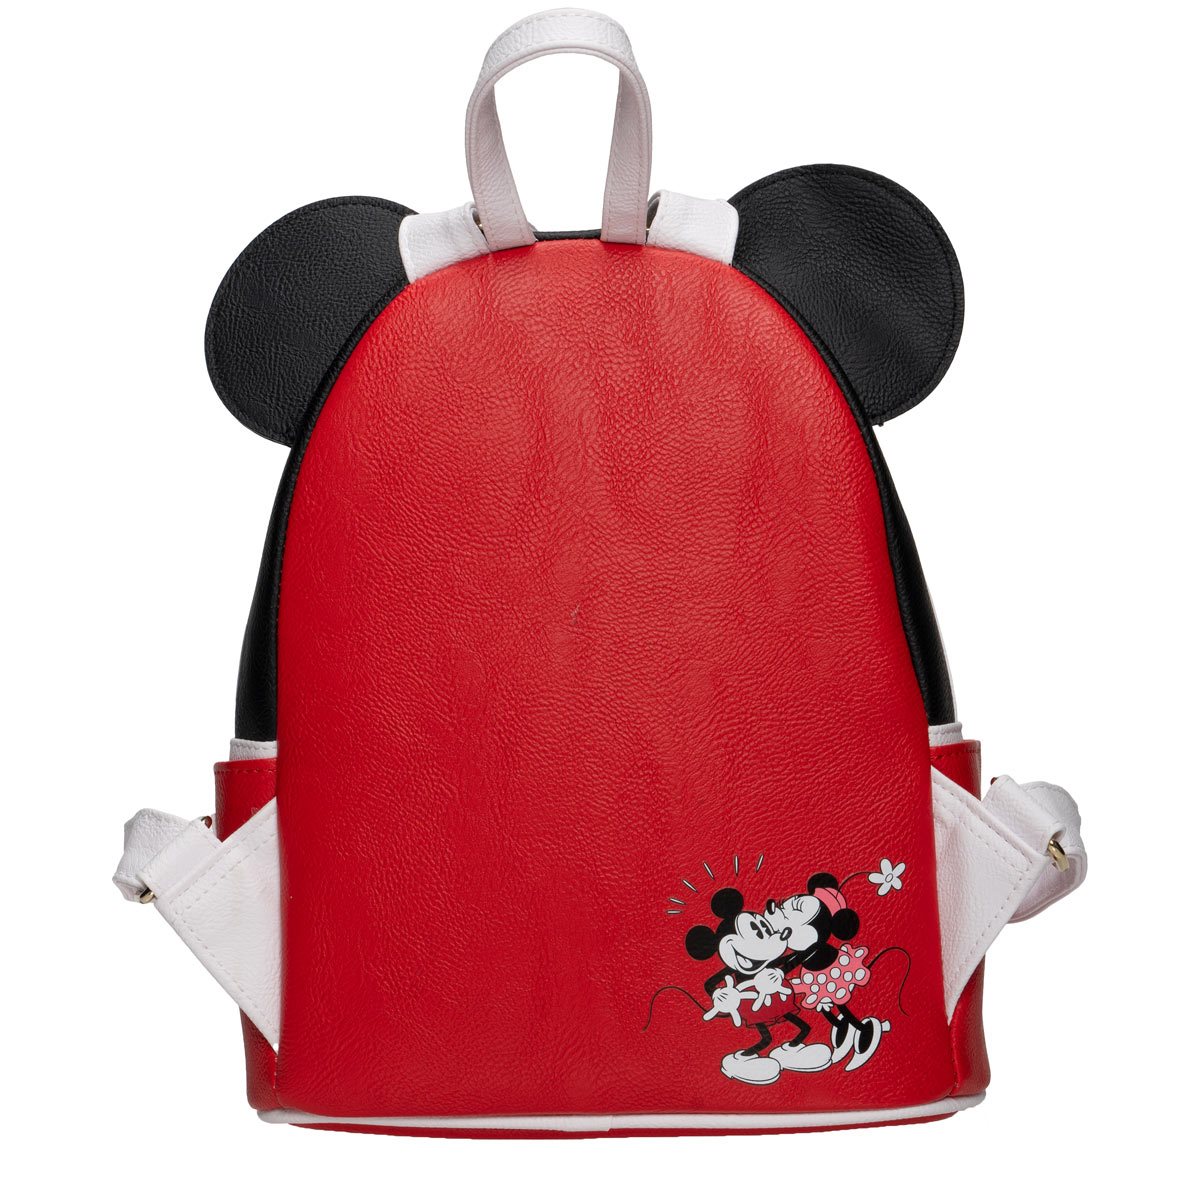 Buy Loungefly Disney Pirate Mickey Mouse Cosplay Double Strap Shoulder Bag  Purse, Multicolor, One Size, Wdbk2774 at Amazon.in